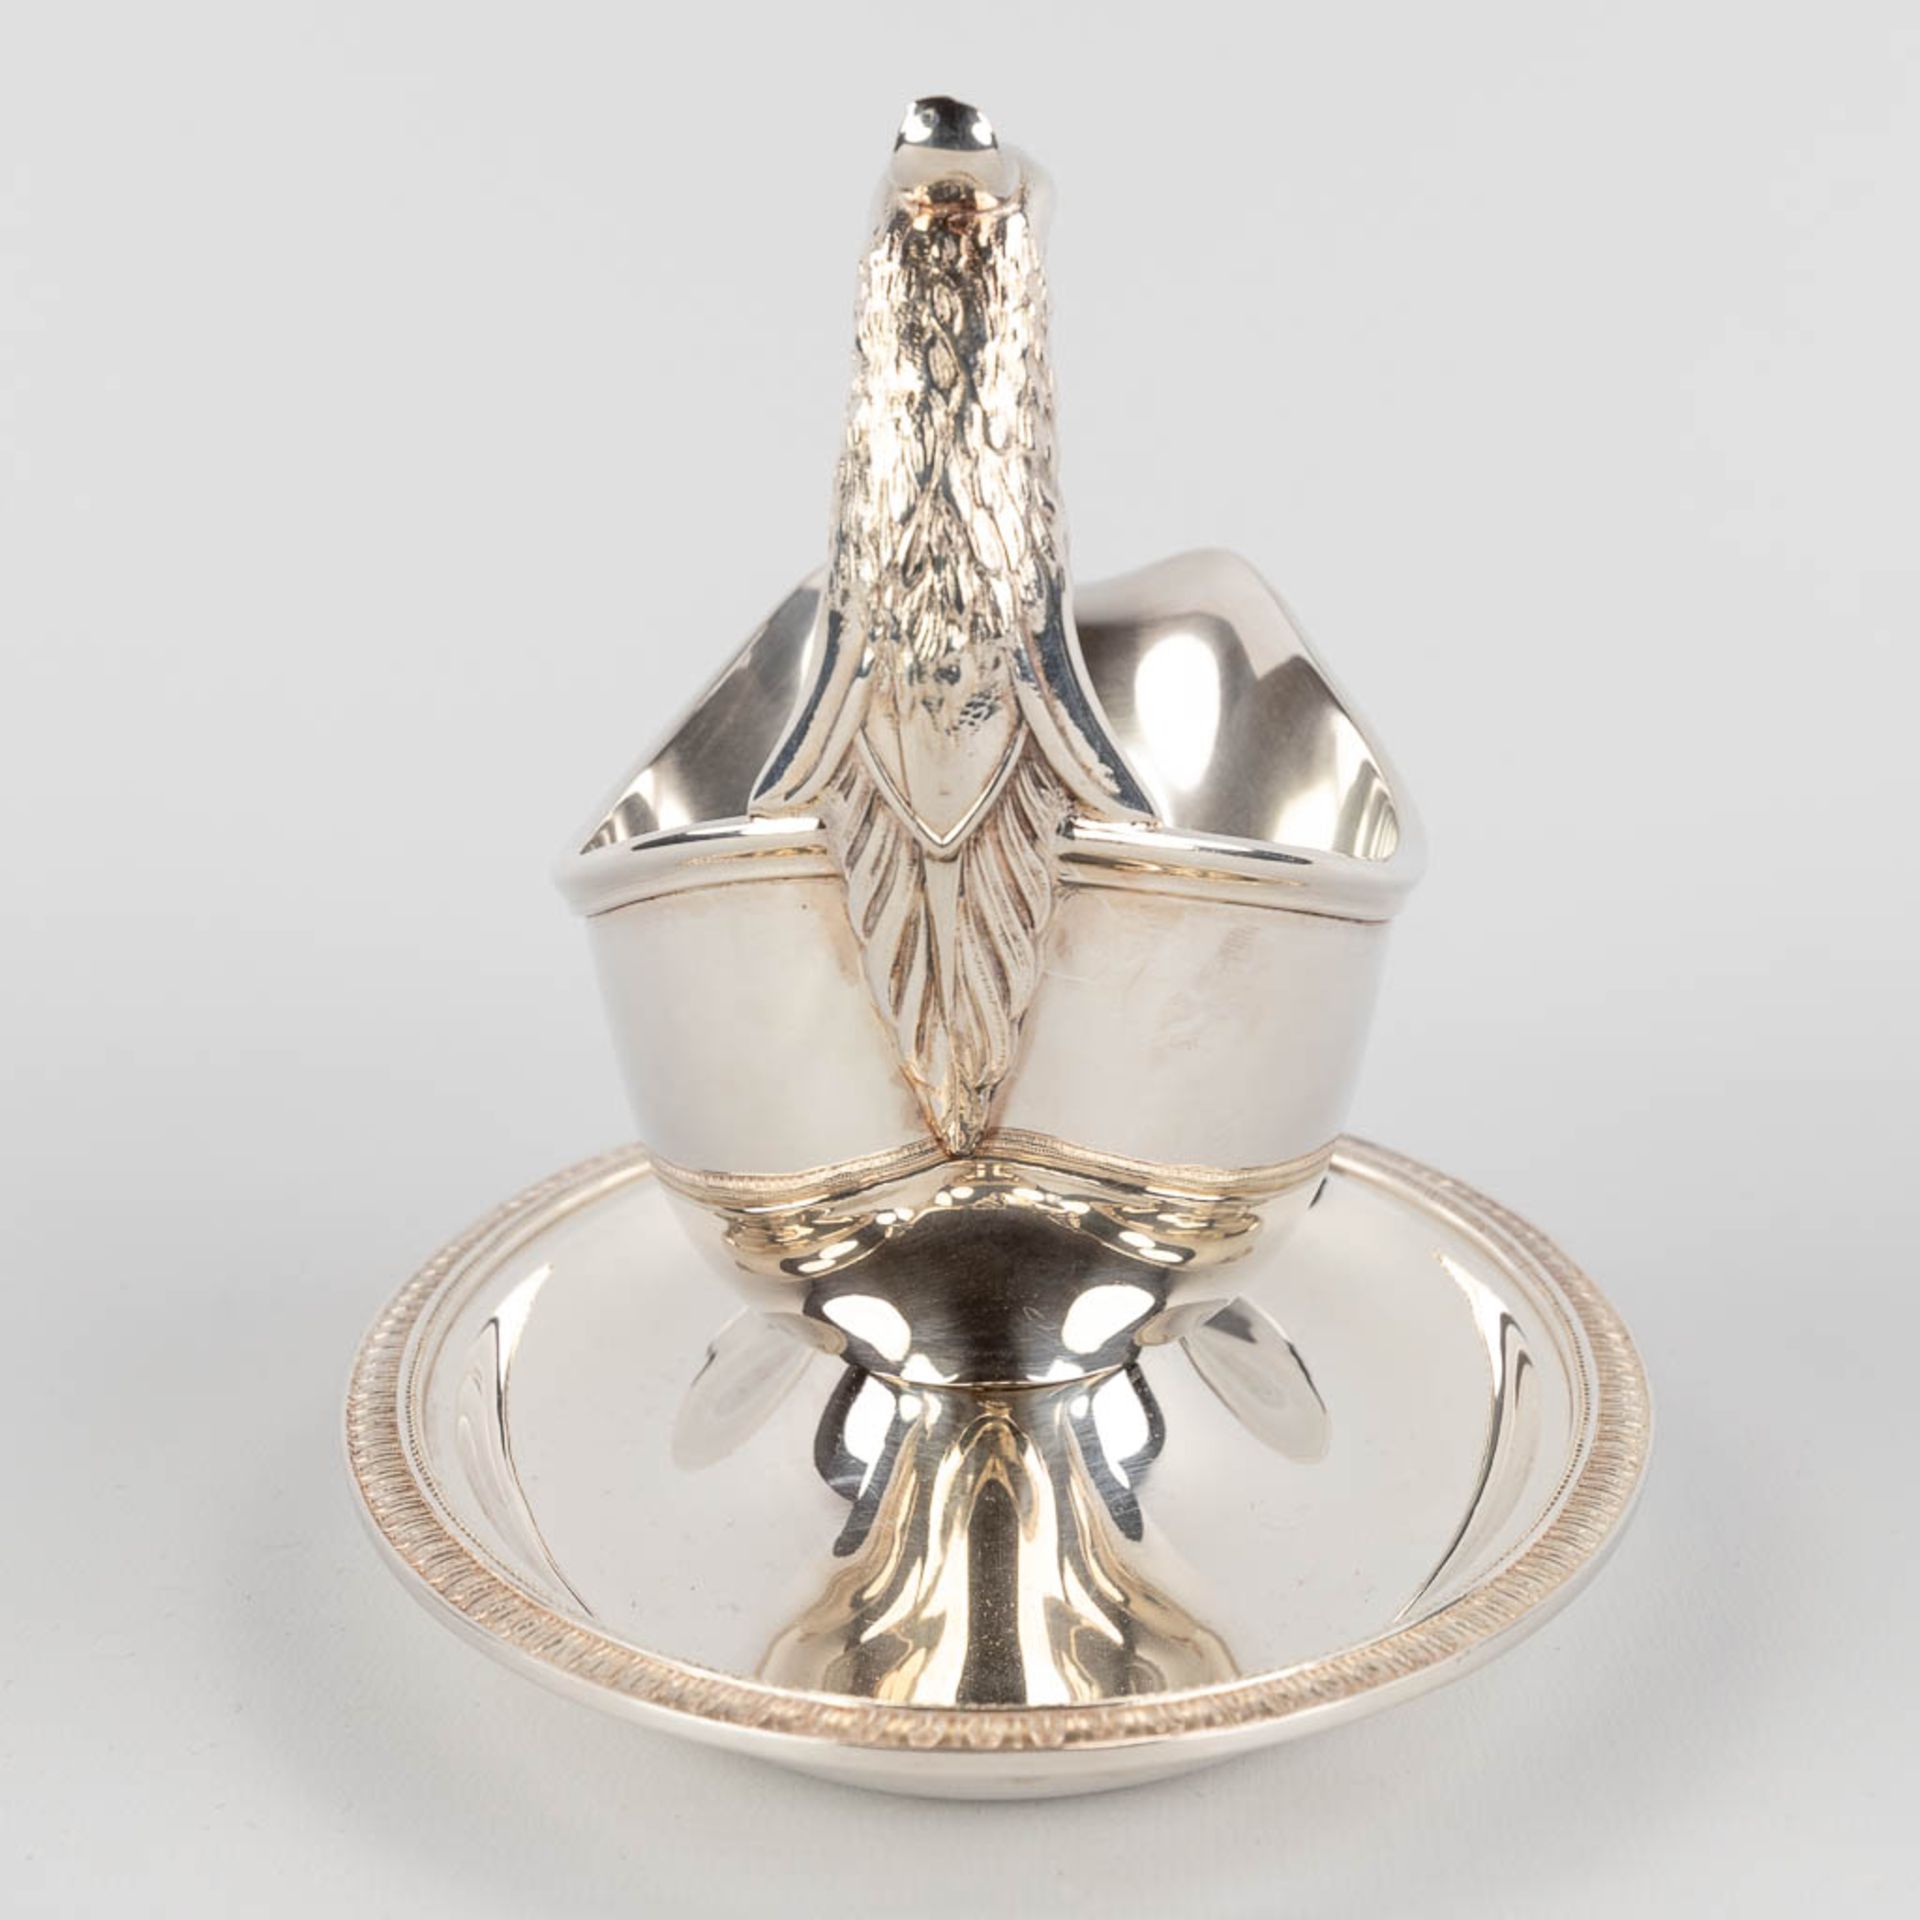 Christofle France, three pieces of silver plated serving accessories. (D:32 x W:45 cm) - Image 12 of 16